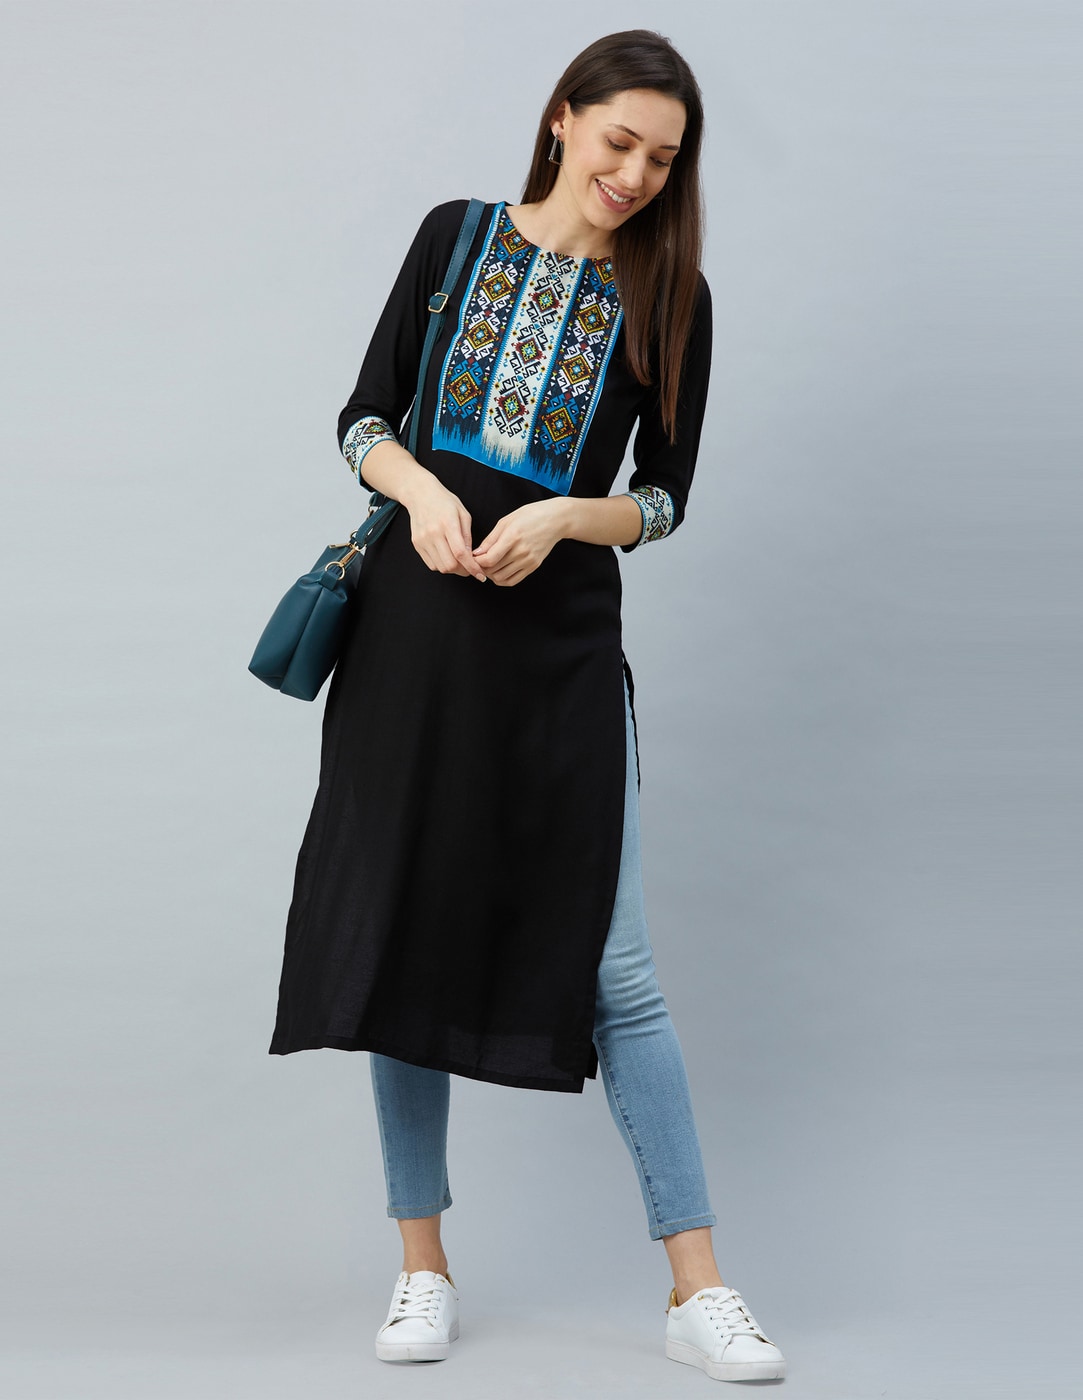 Long Kurti With Jeans - Buy Long Kurti With Jeans online at Best Prices in  India | Flipkart.com